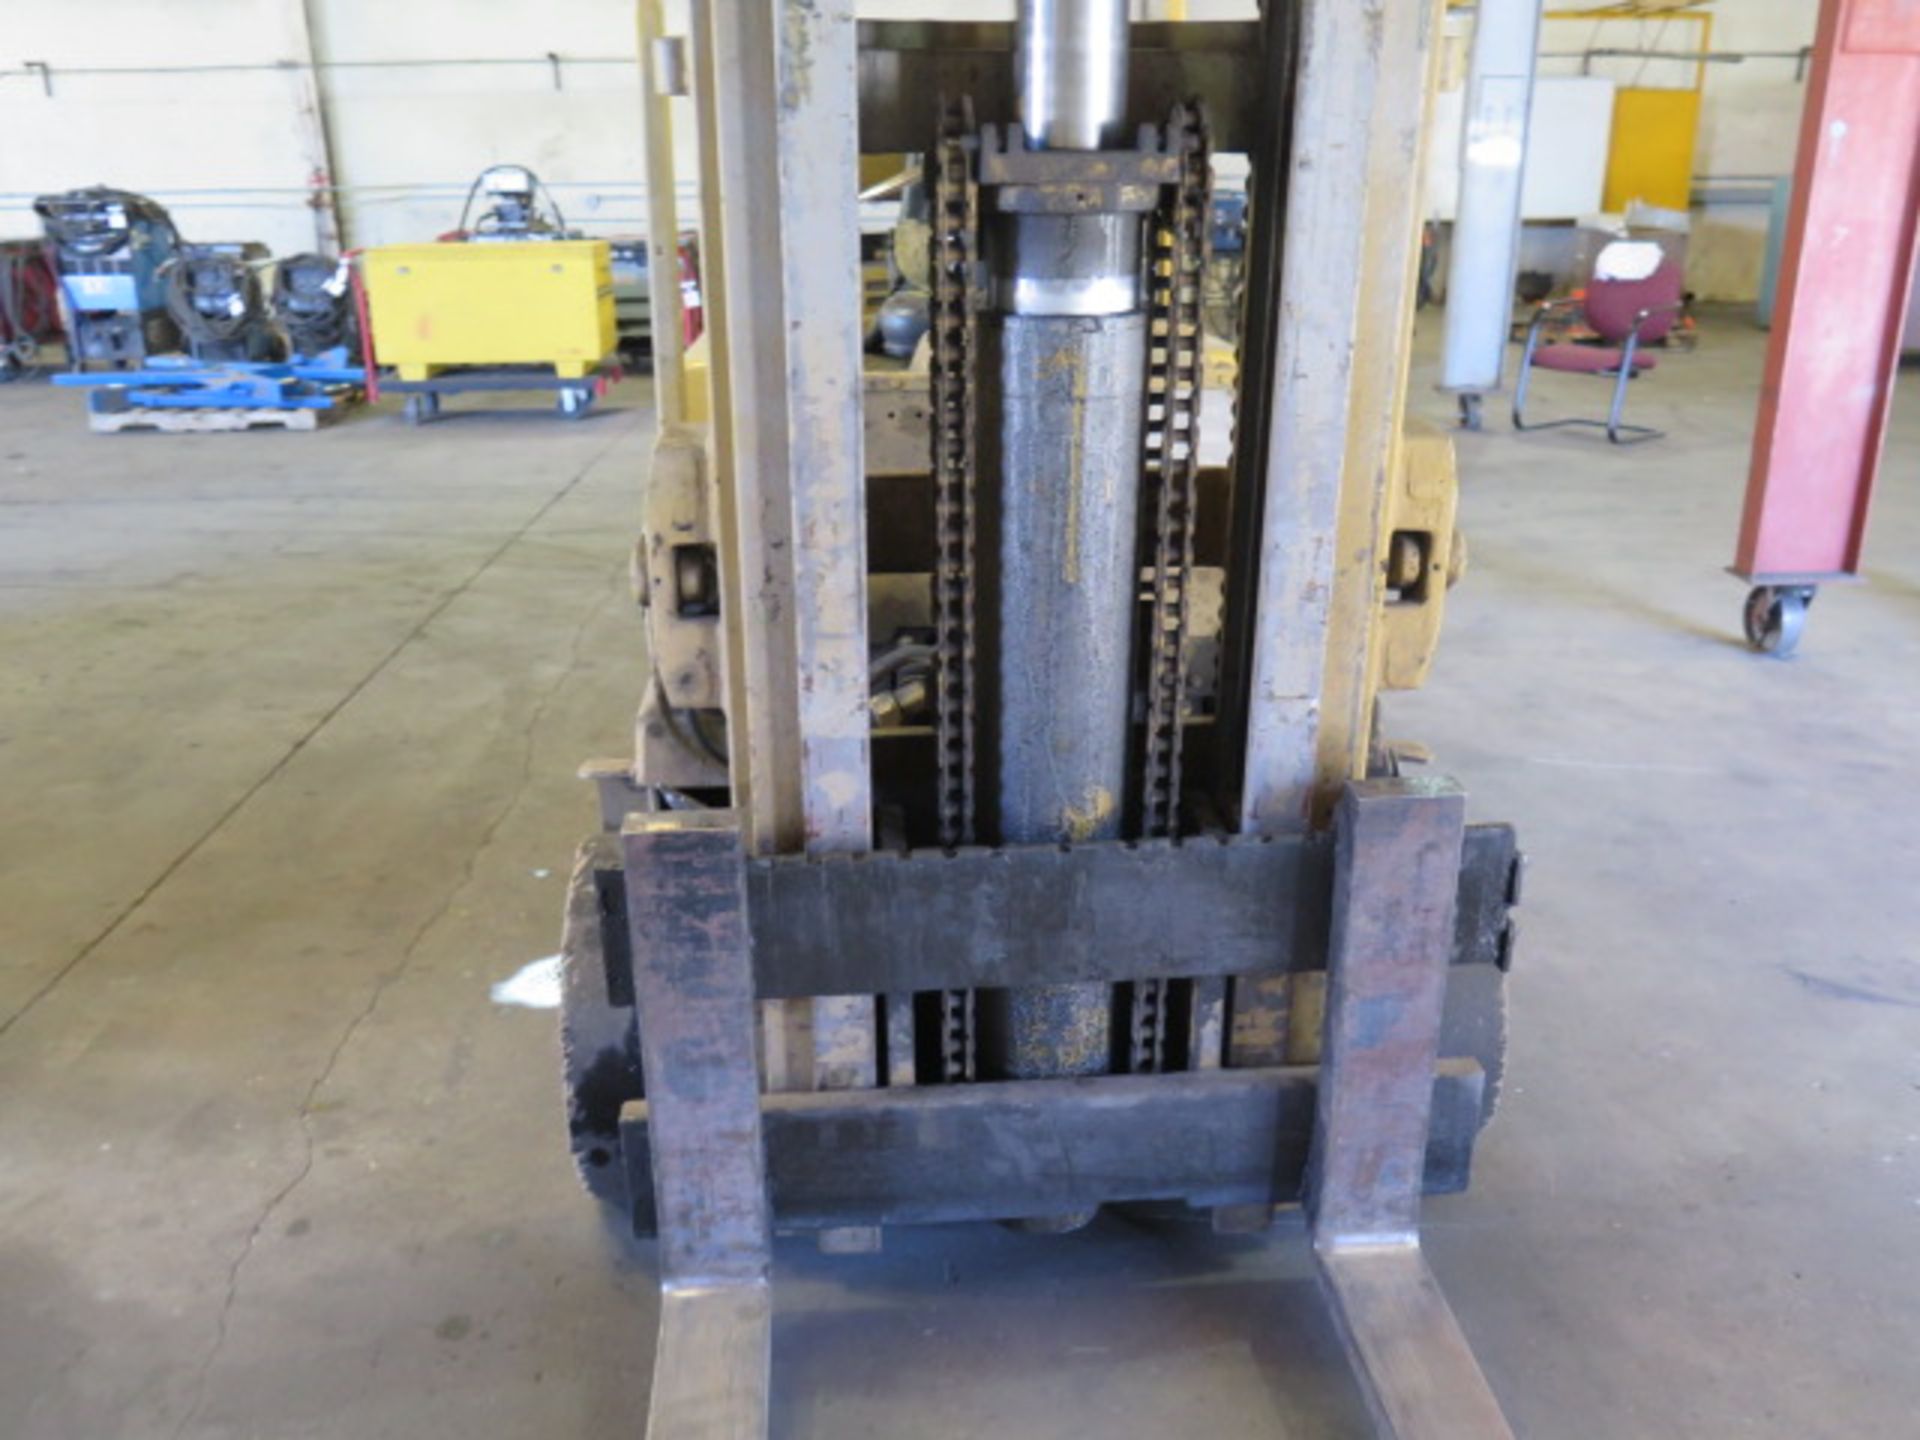 Clark C500-80 7250 Lb Cap LPG Forklift s/n 685-285-22511072 w/ 3-Stage, 180" Lift Height, SOLD AS IS - Image 7 of 13